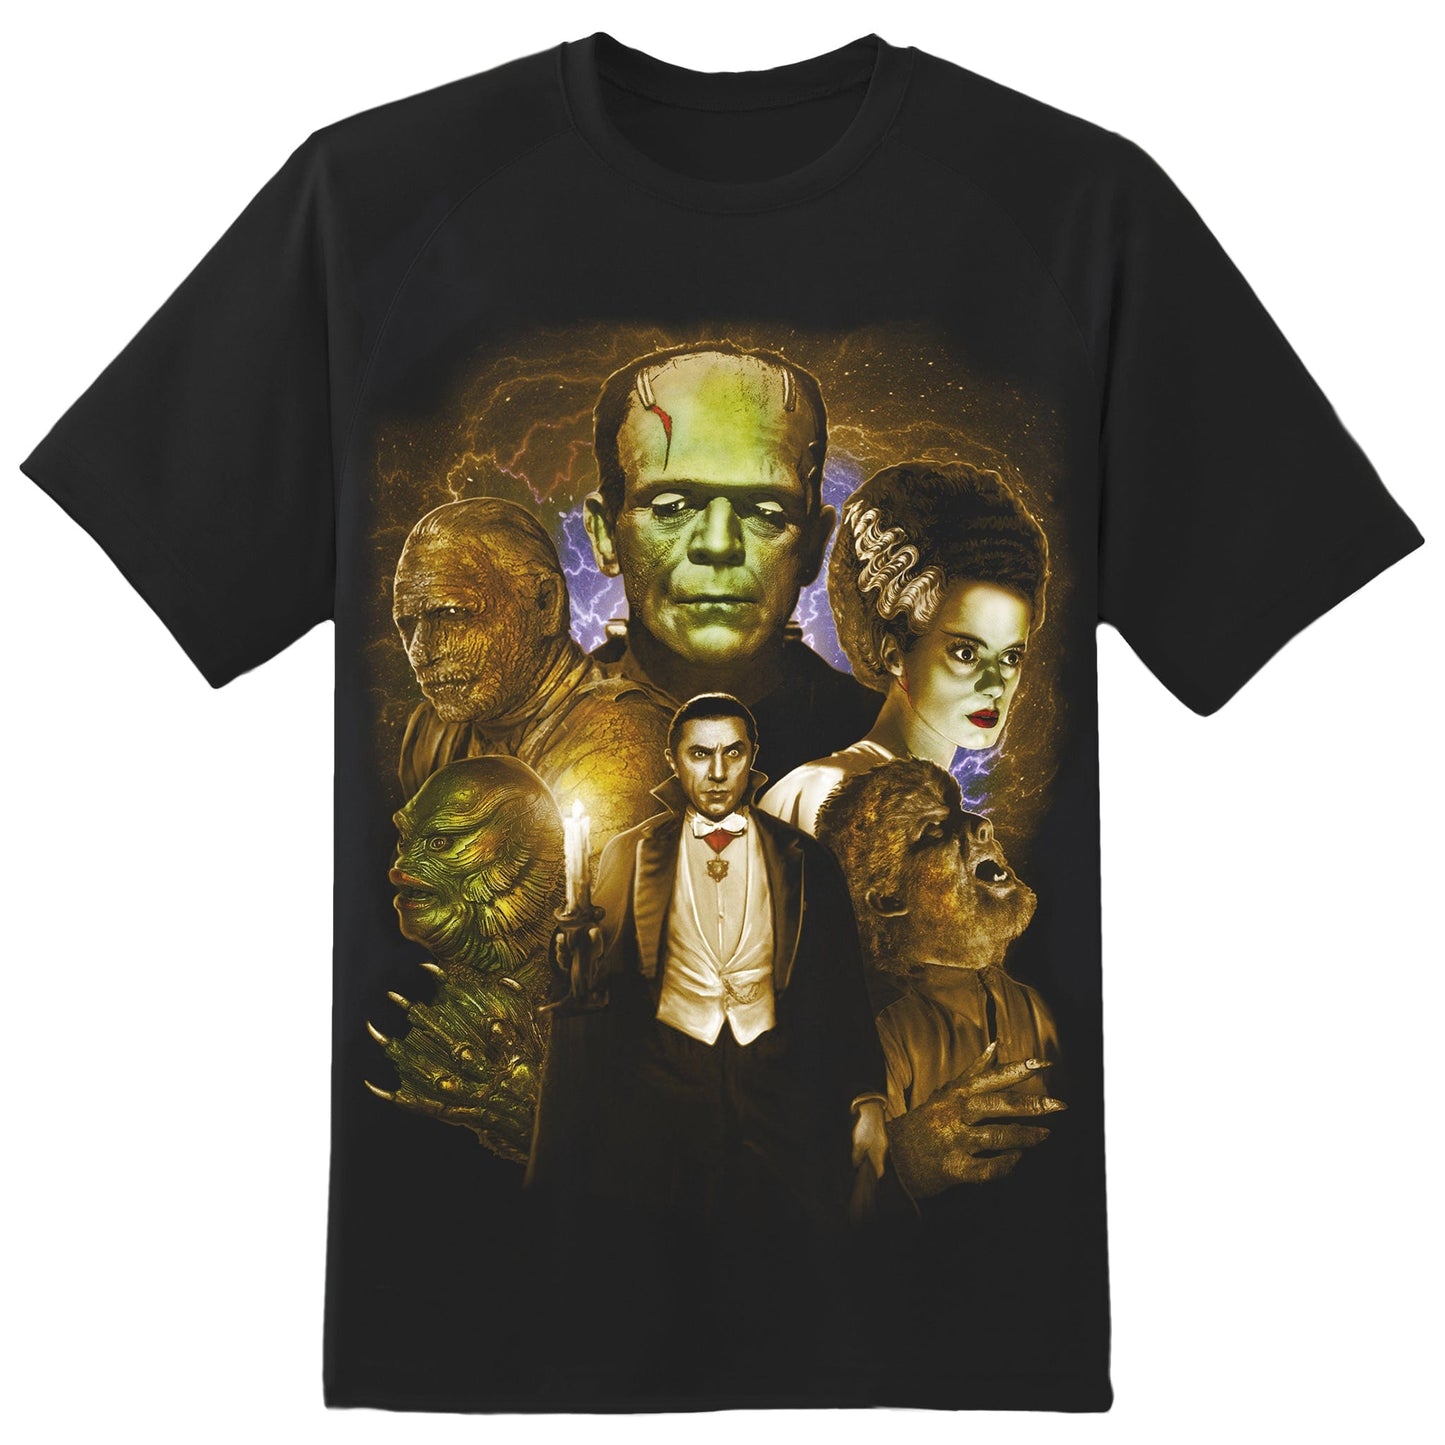 Universal Monsters Full Color Collage Men's Tee